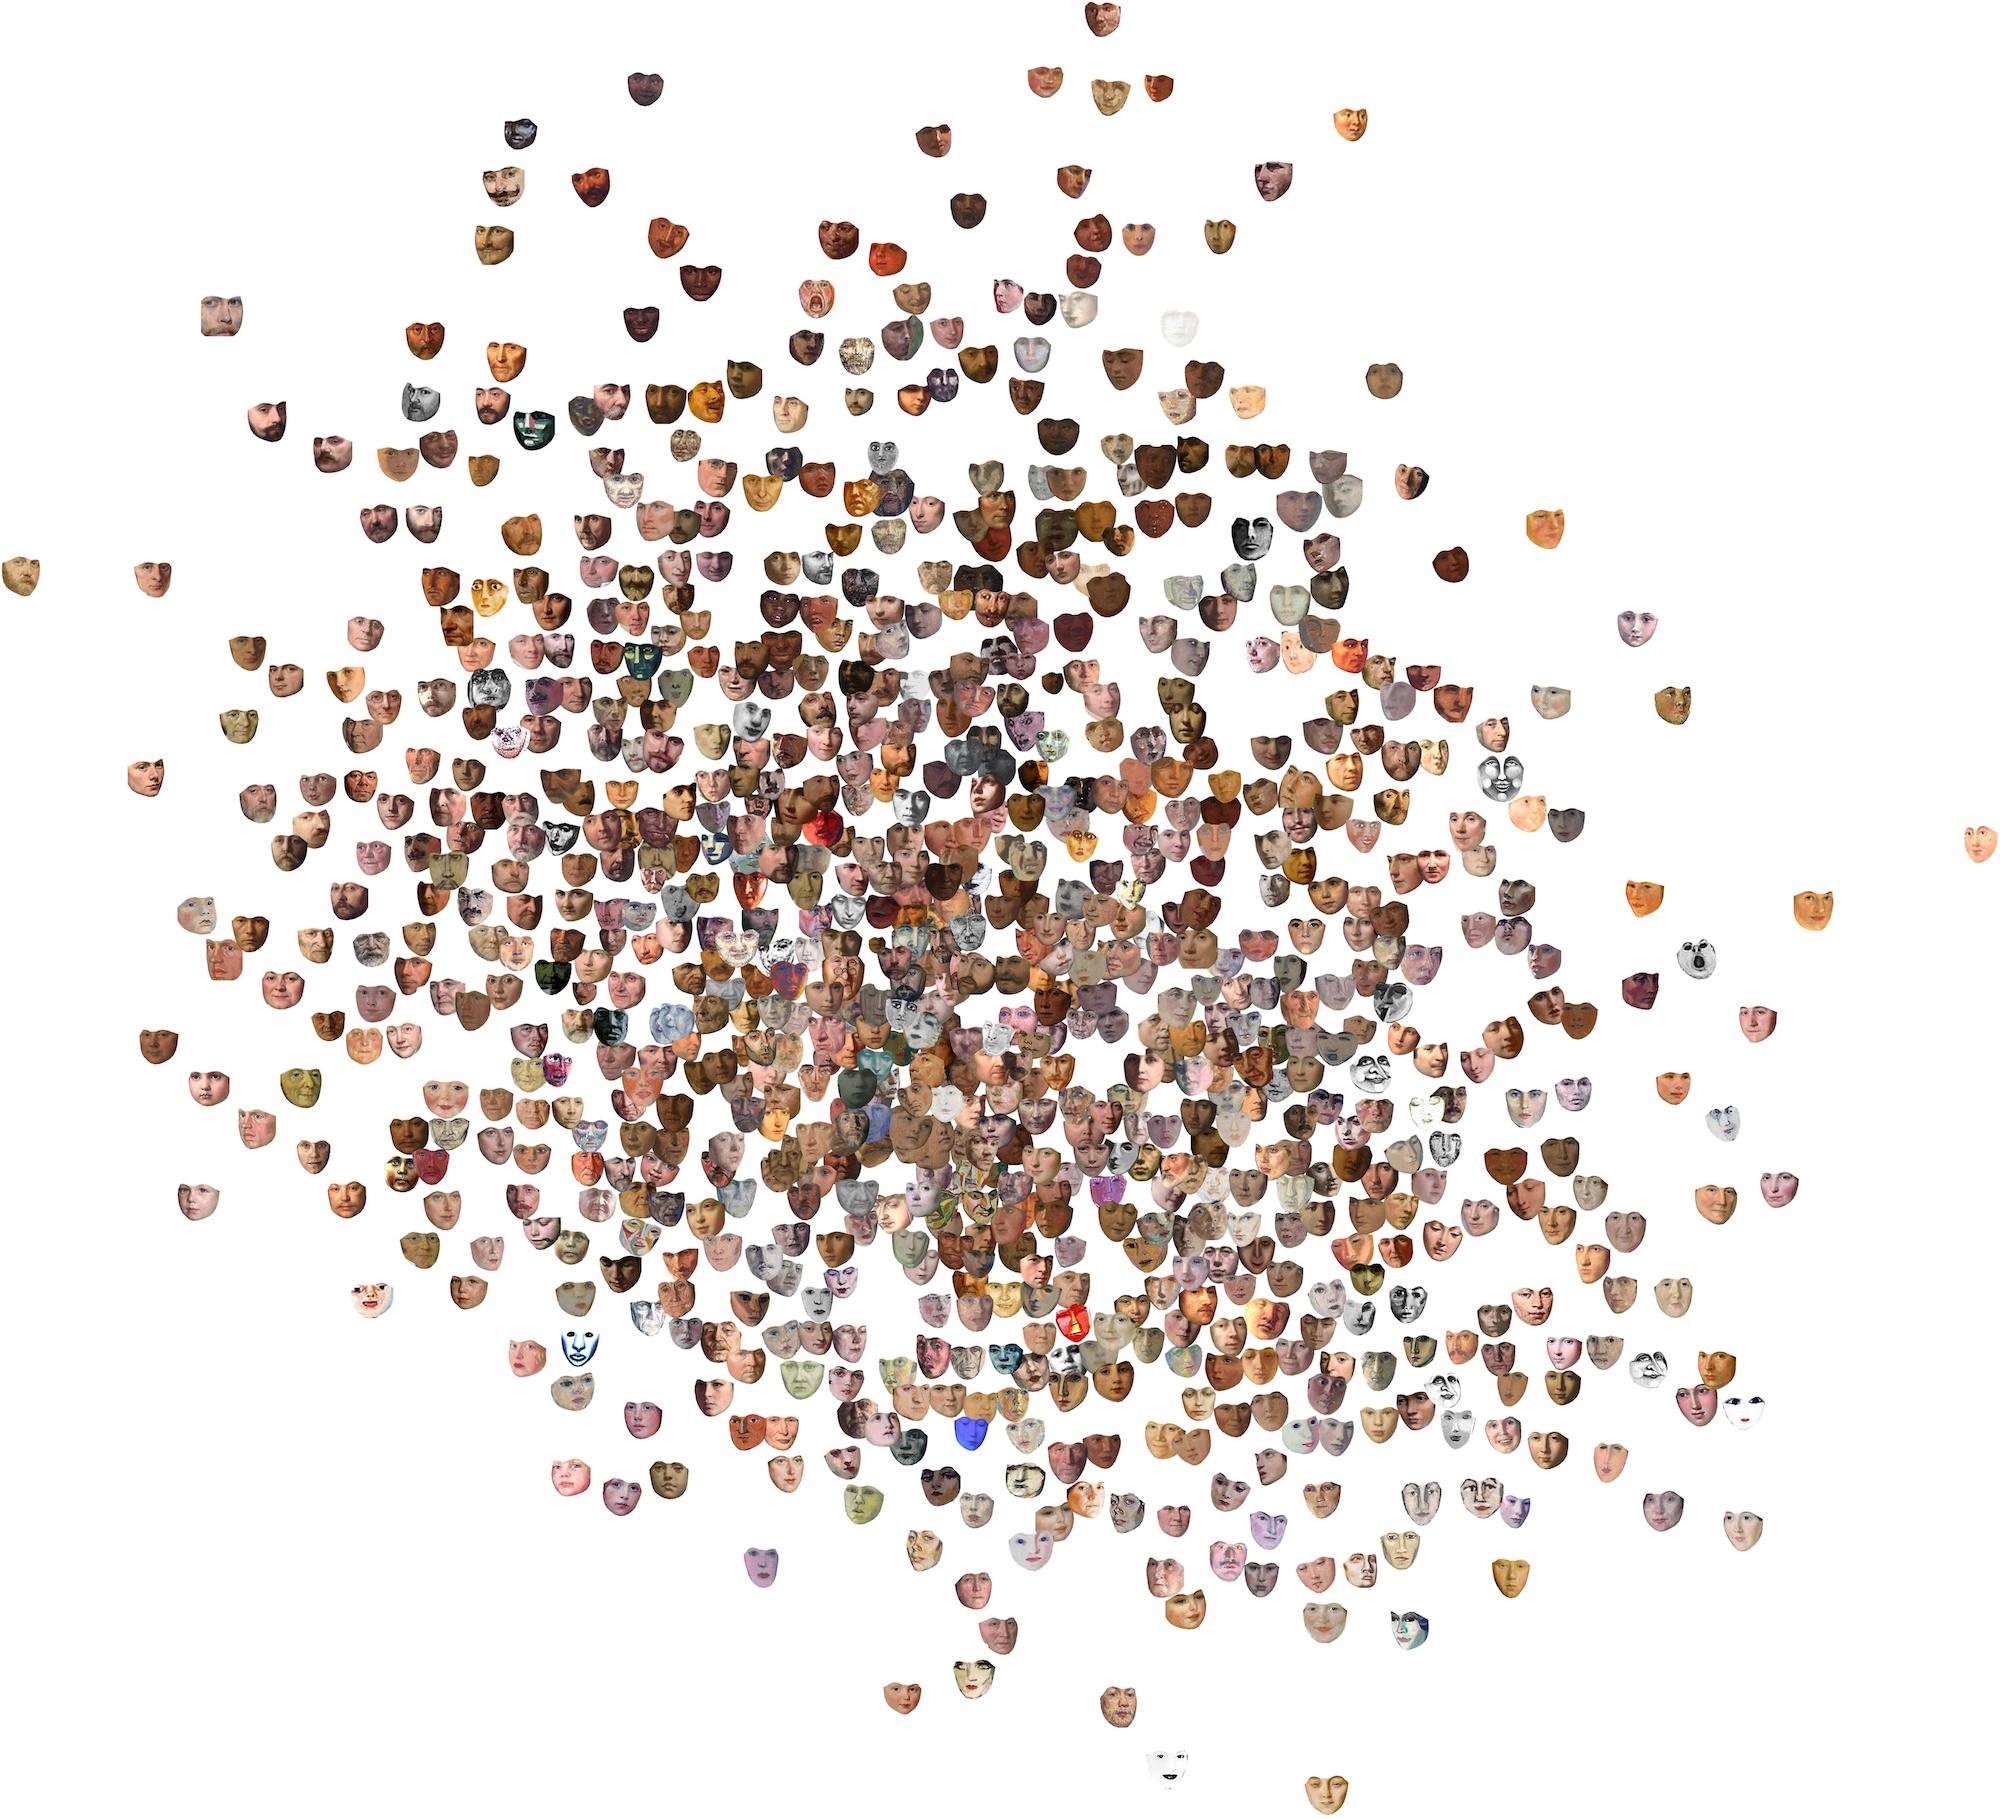 t-SNE of faces in the collection